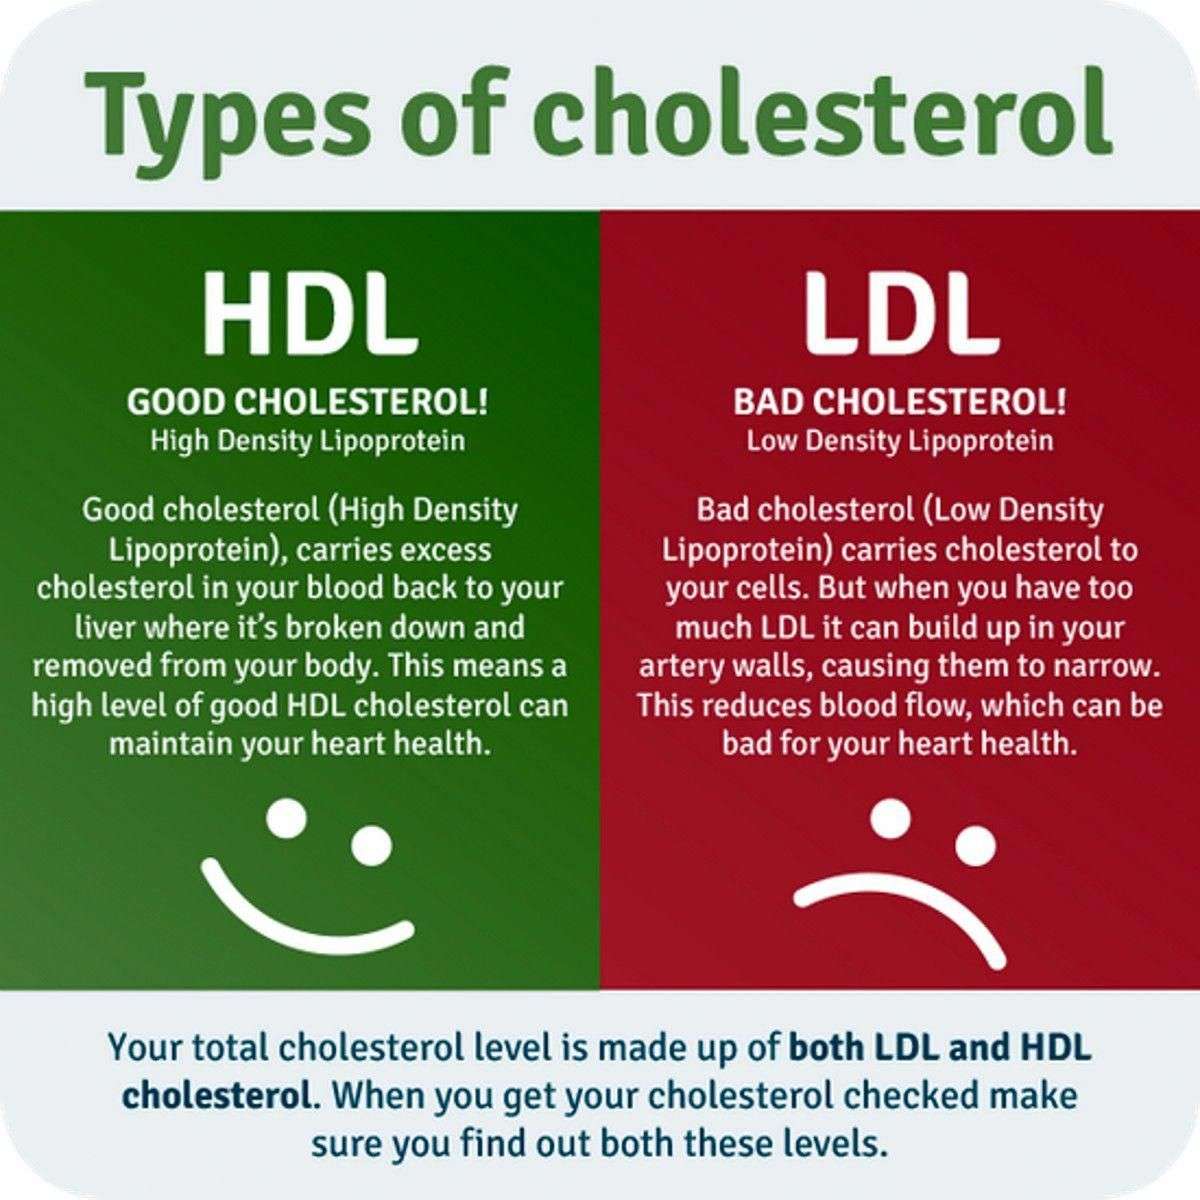 Know you good and your bad fats.... HDL plant based fats ...